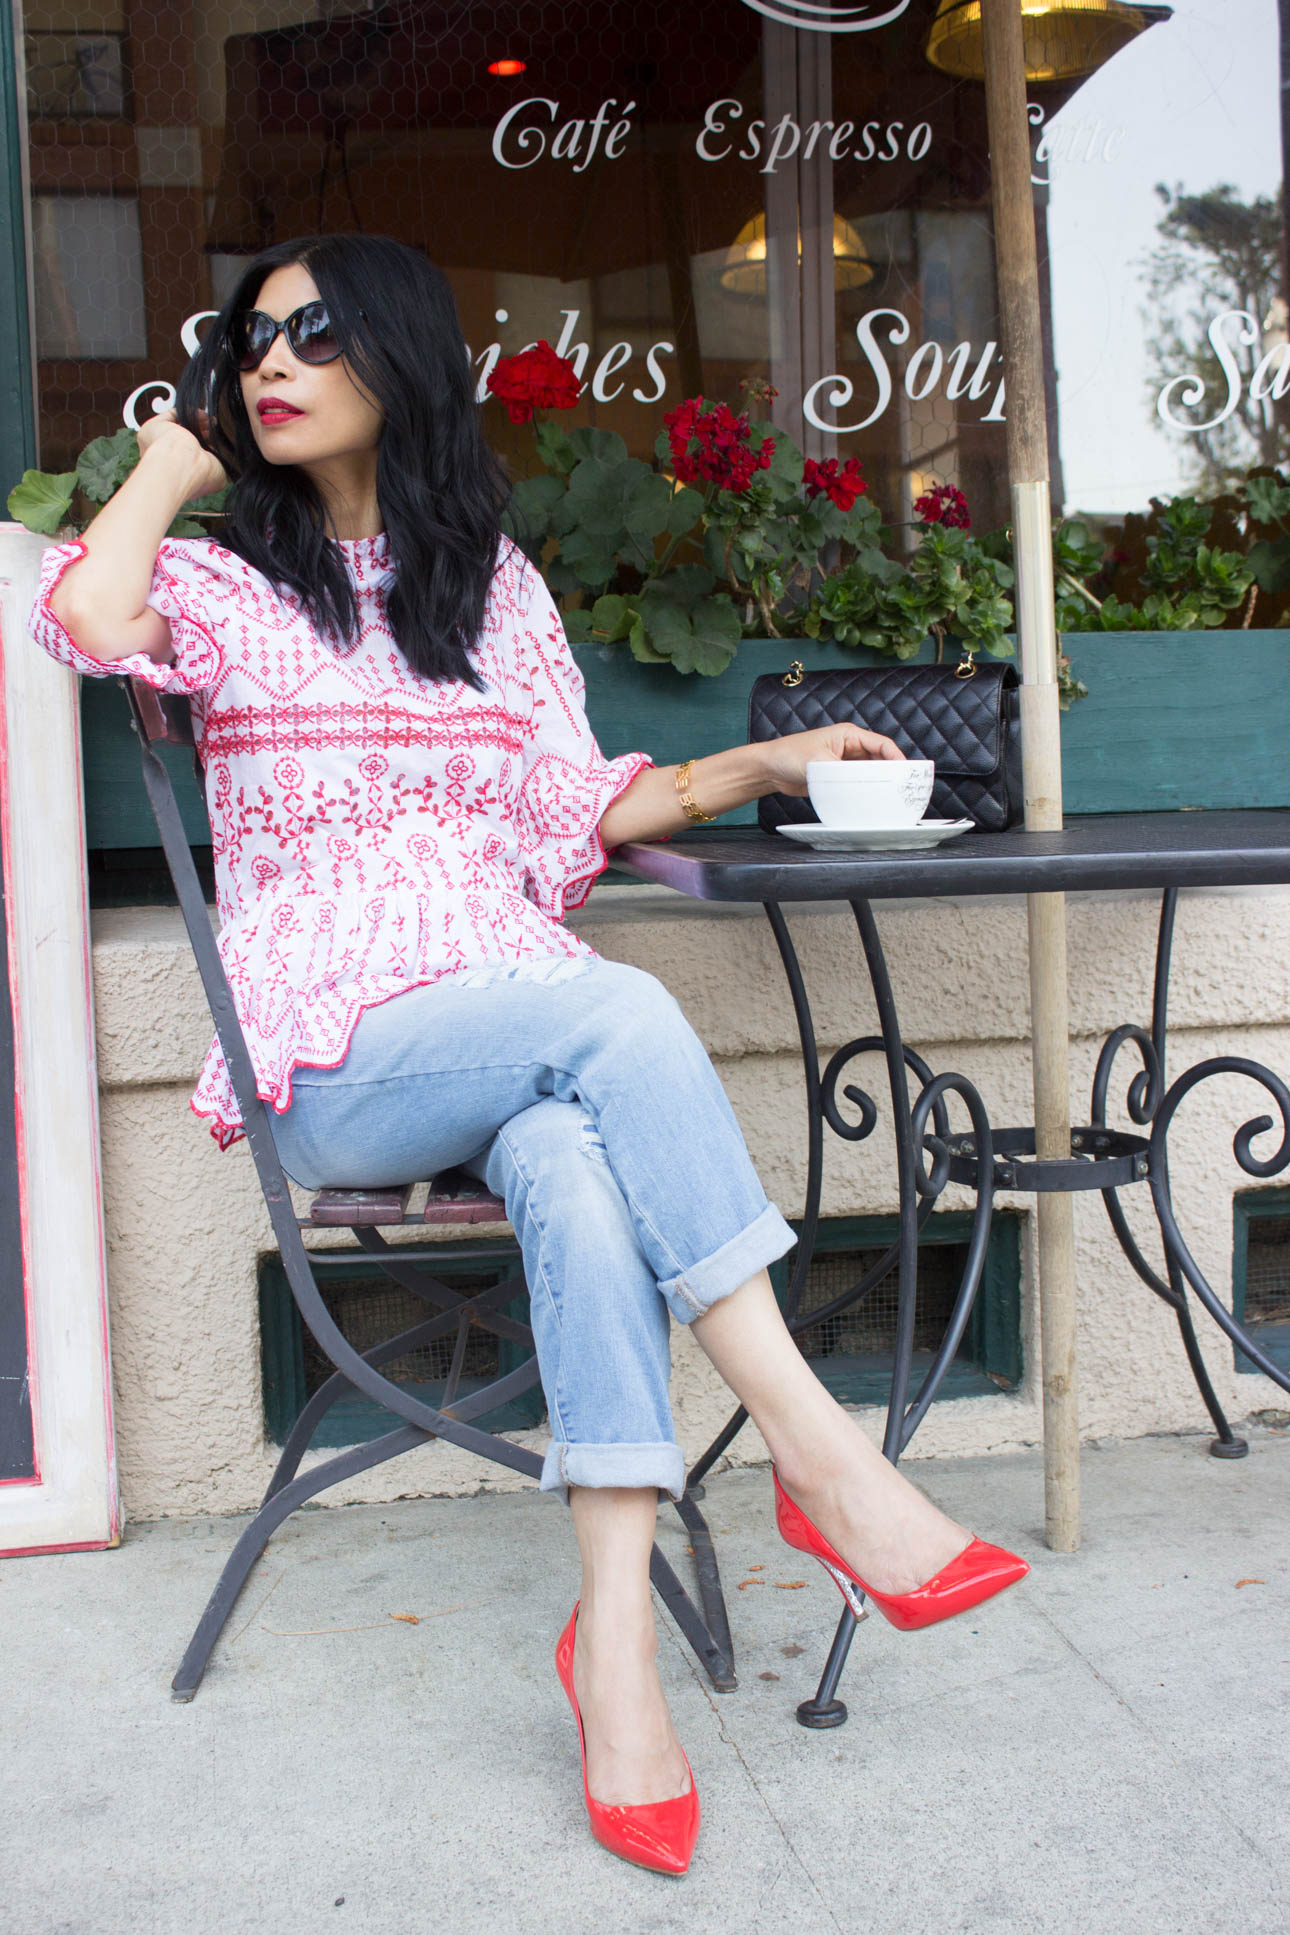 Woman in jeans red shoes with black heels posing - Stock Photo [61270877] -  PIXTA